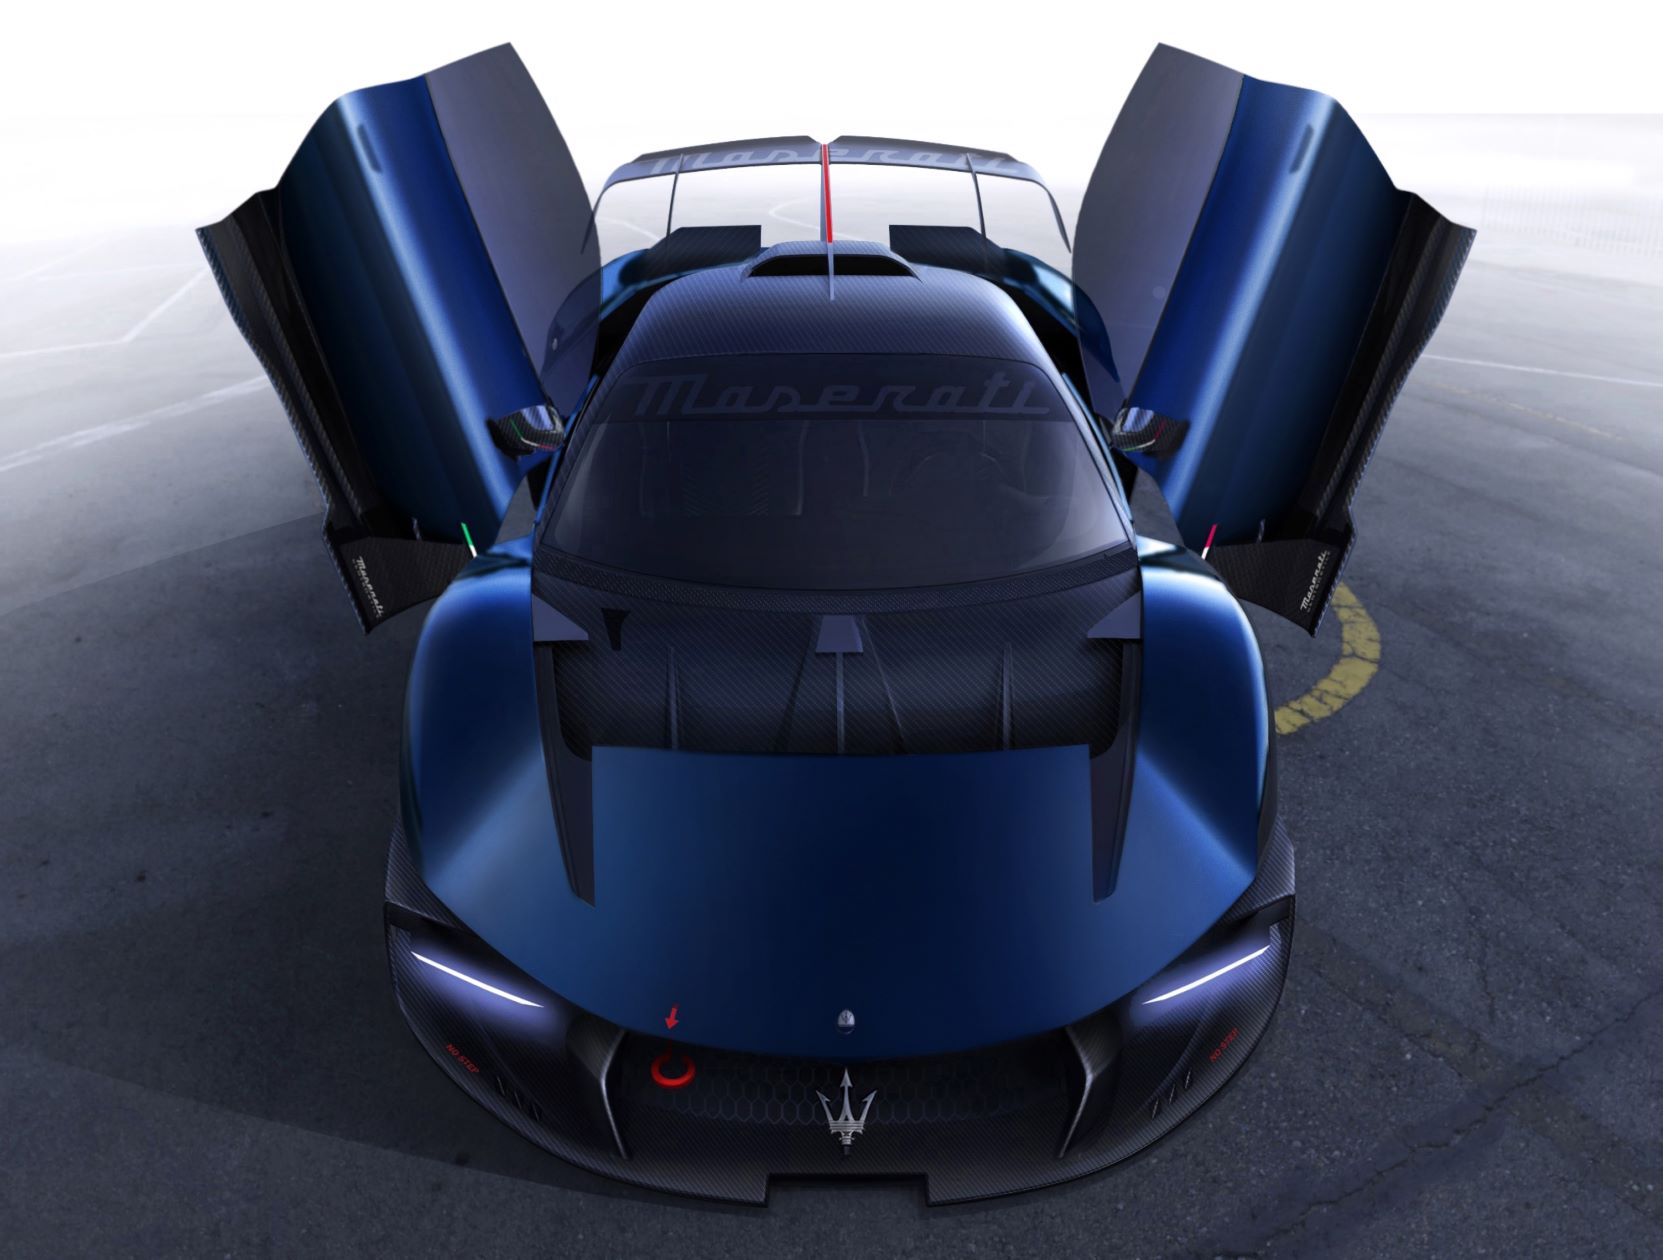 Front view of the Maserati Project 24 with the doors raised